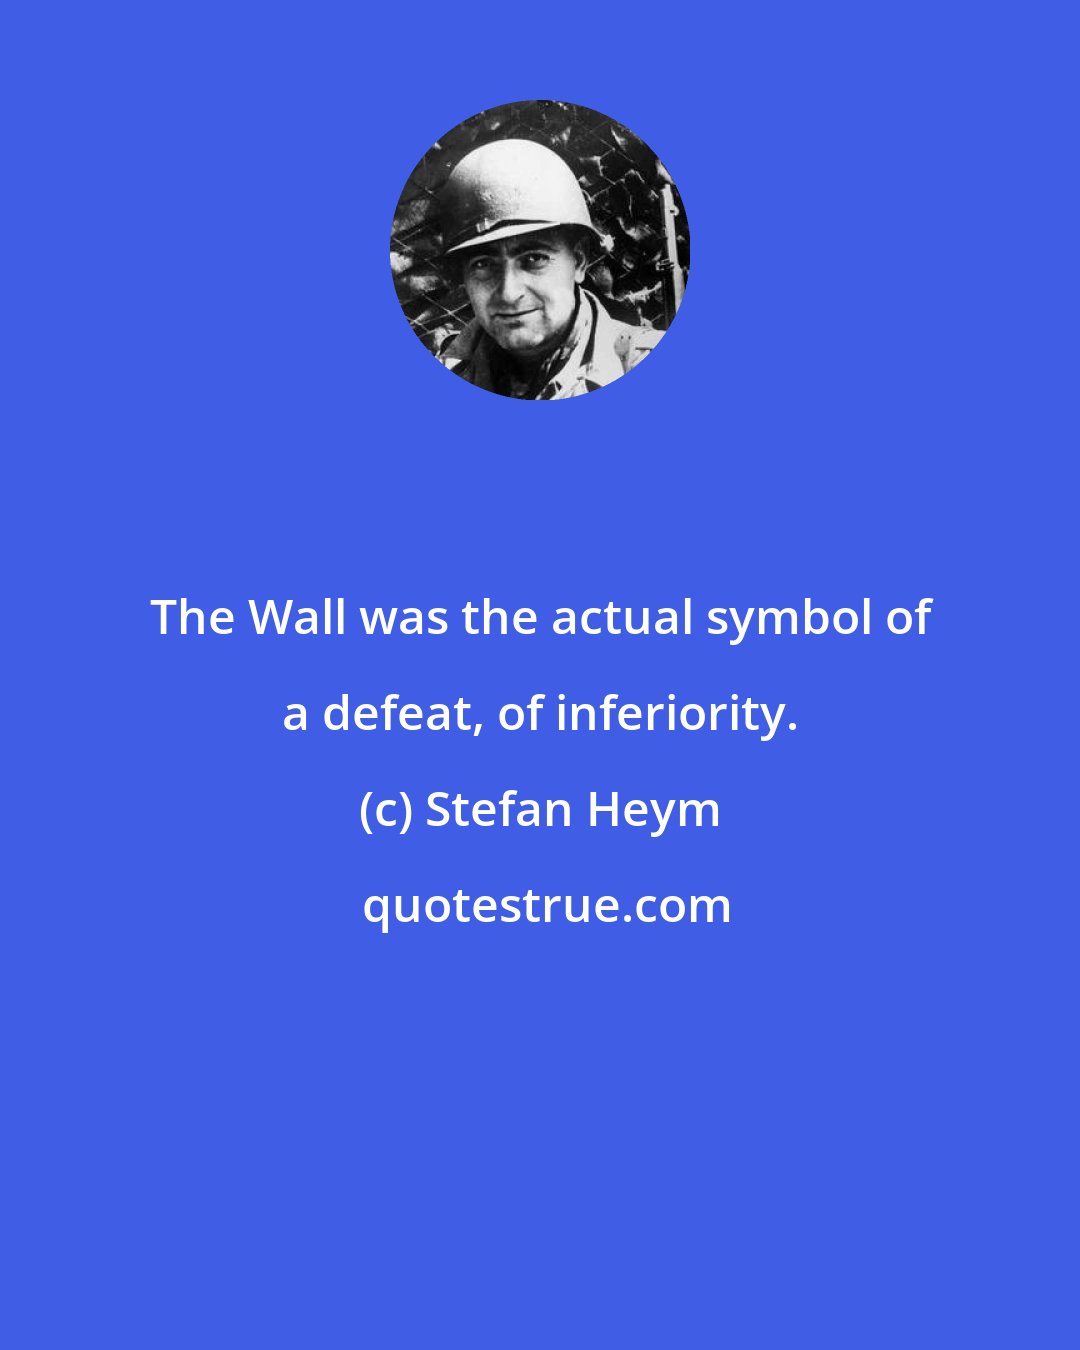 Stefan Heym: The Wall was the actual symbol of a defeat, of inferiority.